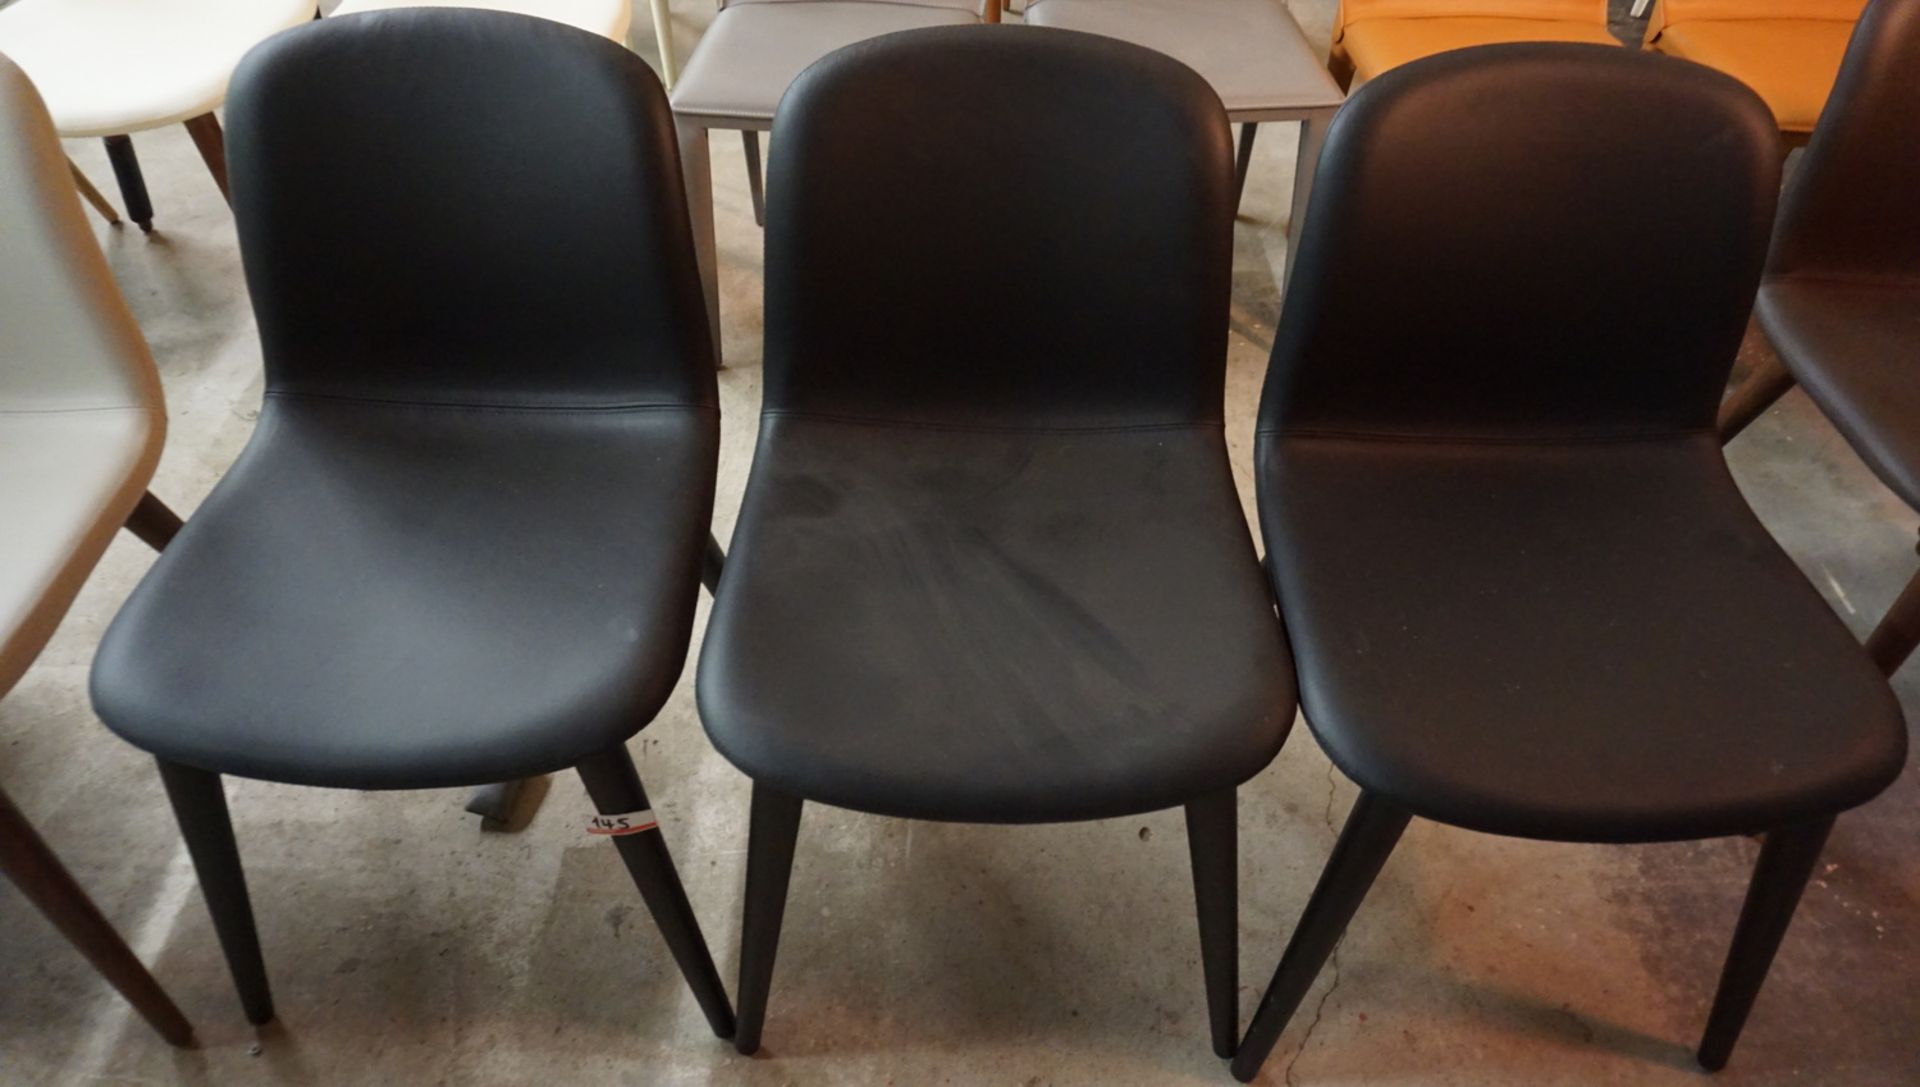 UNITS - JOBS BACCO BLACK LEATHER DINING / GUEST CHAIRS (MADE IN ITALY) (MSRP $995)